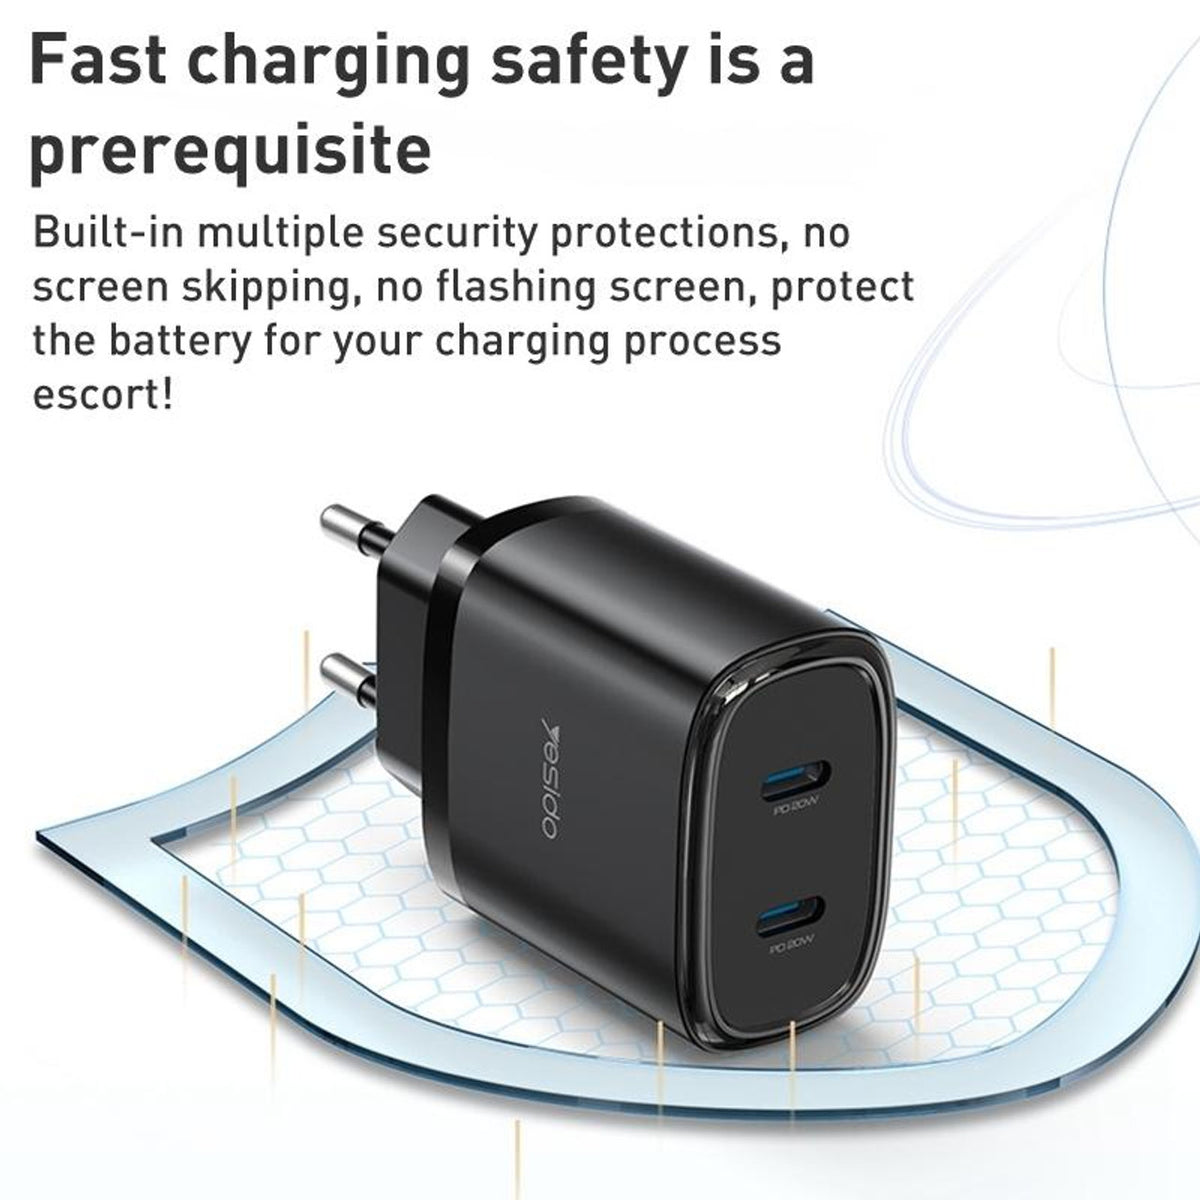 Yesido YC54 20W Dual Port Fast Charger with USB Lightning charging cable - New - Mac Shack